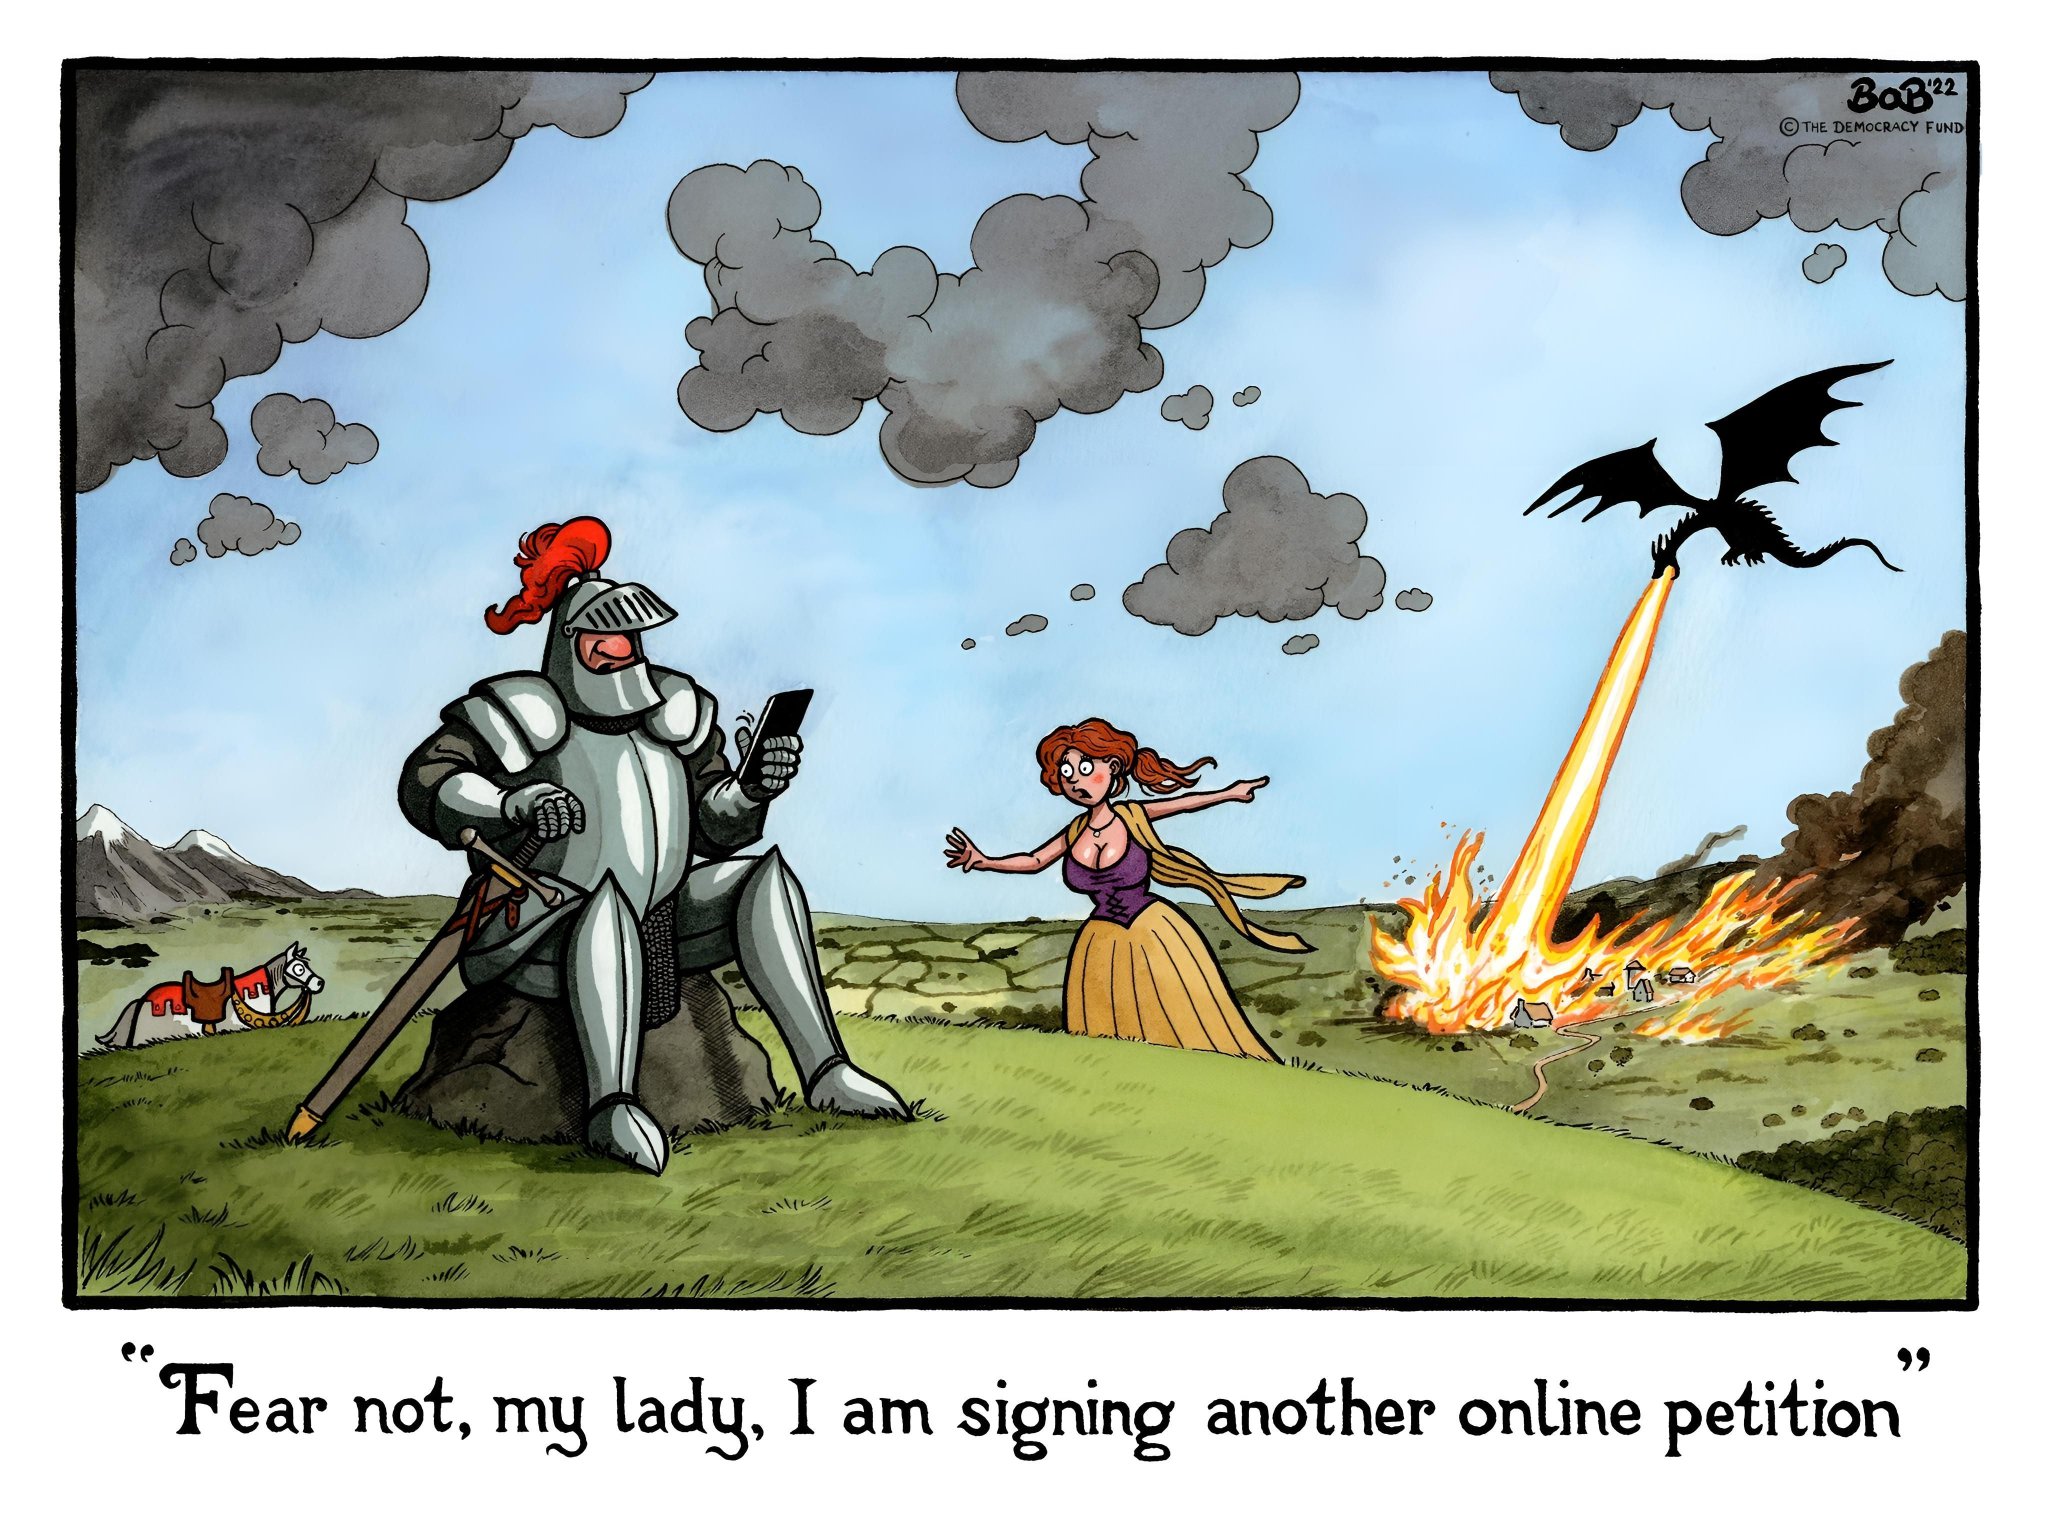 !..
www.
O
.
BaB'22
THE DEMOCRACY FUND
Mus
Man
"Fear not, my lady, I am signing another online petition
WINYIR